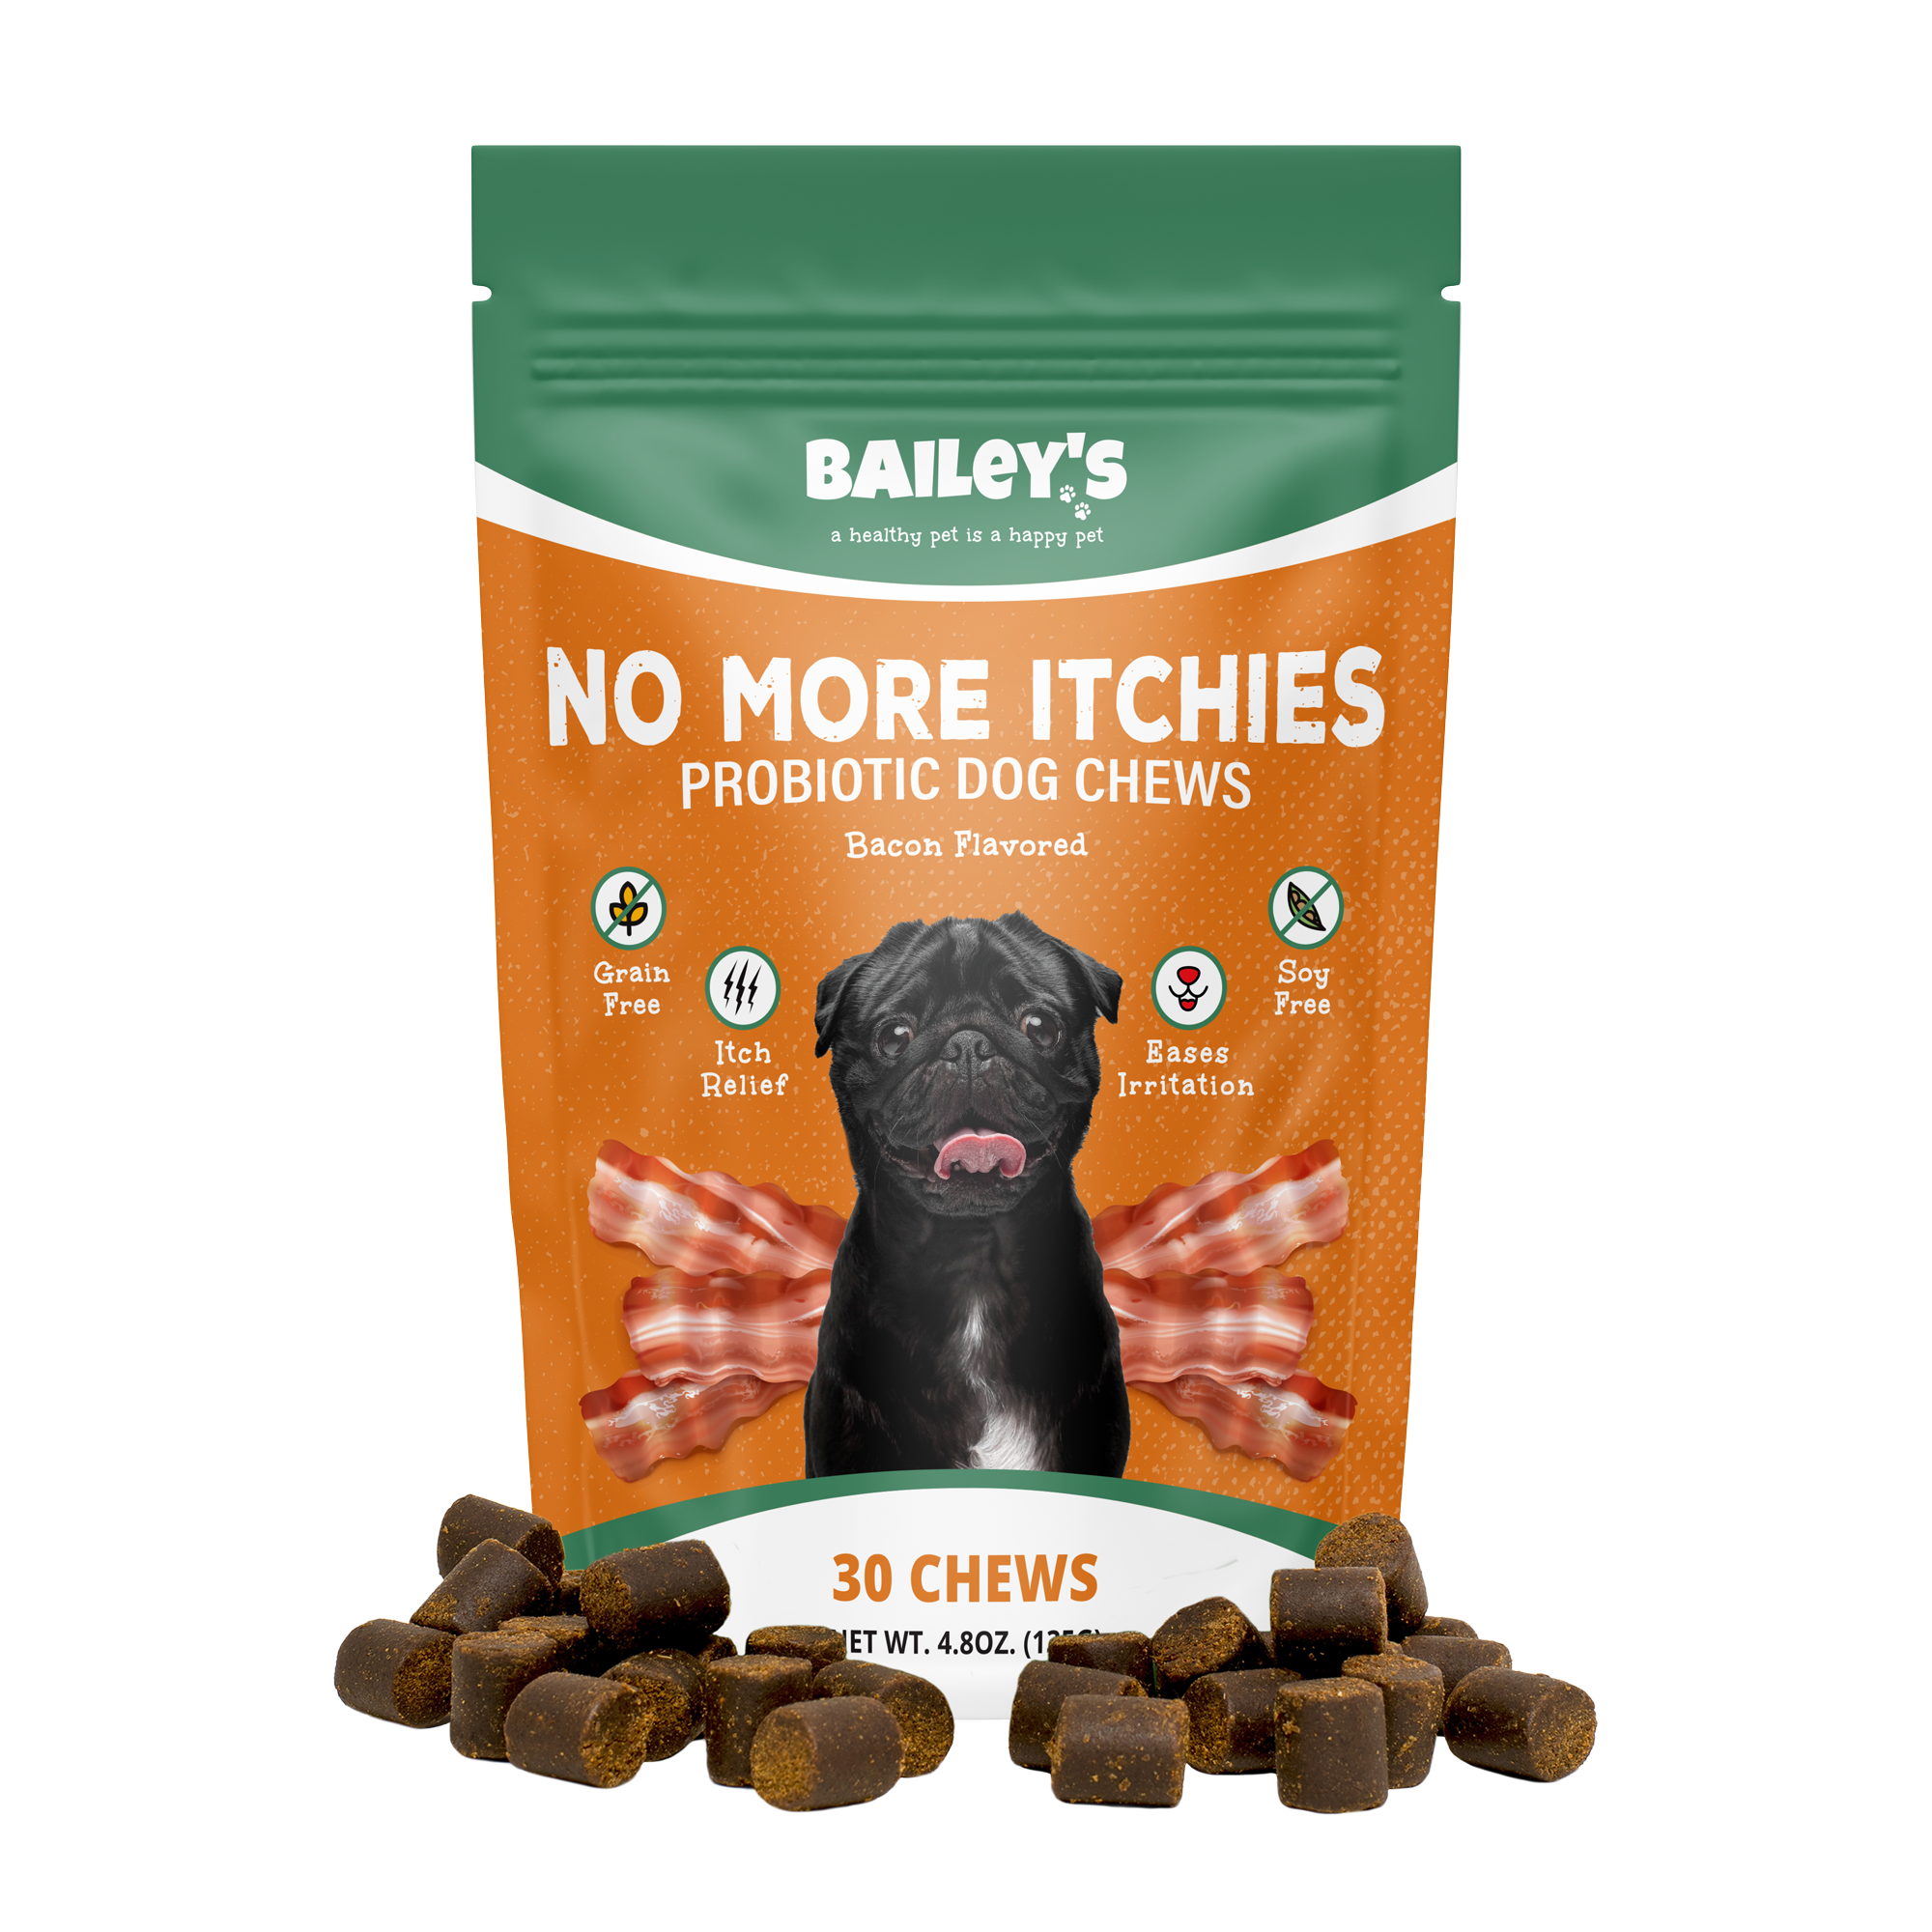 Bailey's No More Itchies Probiotic Dog Chews